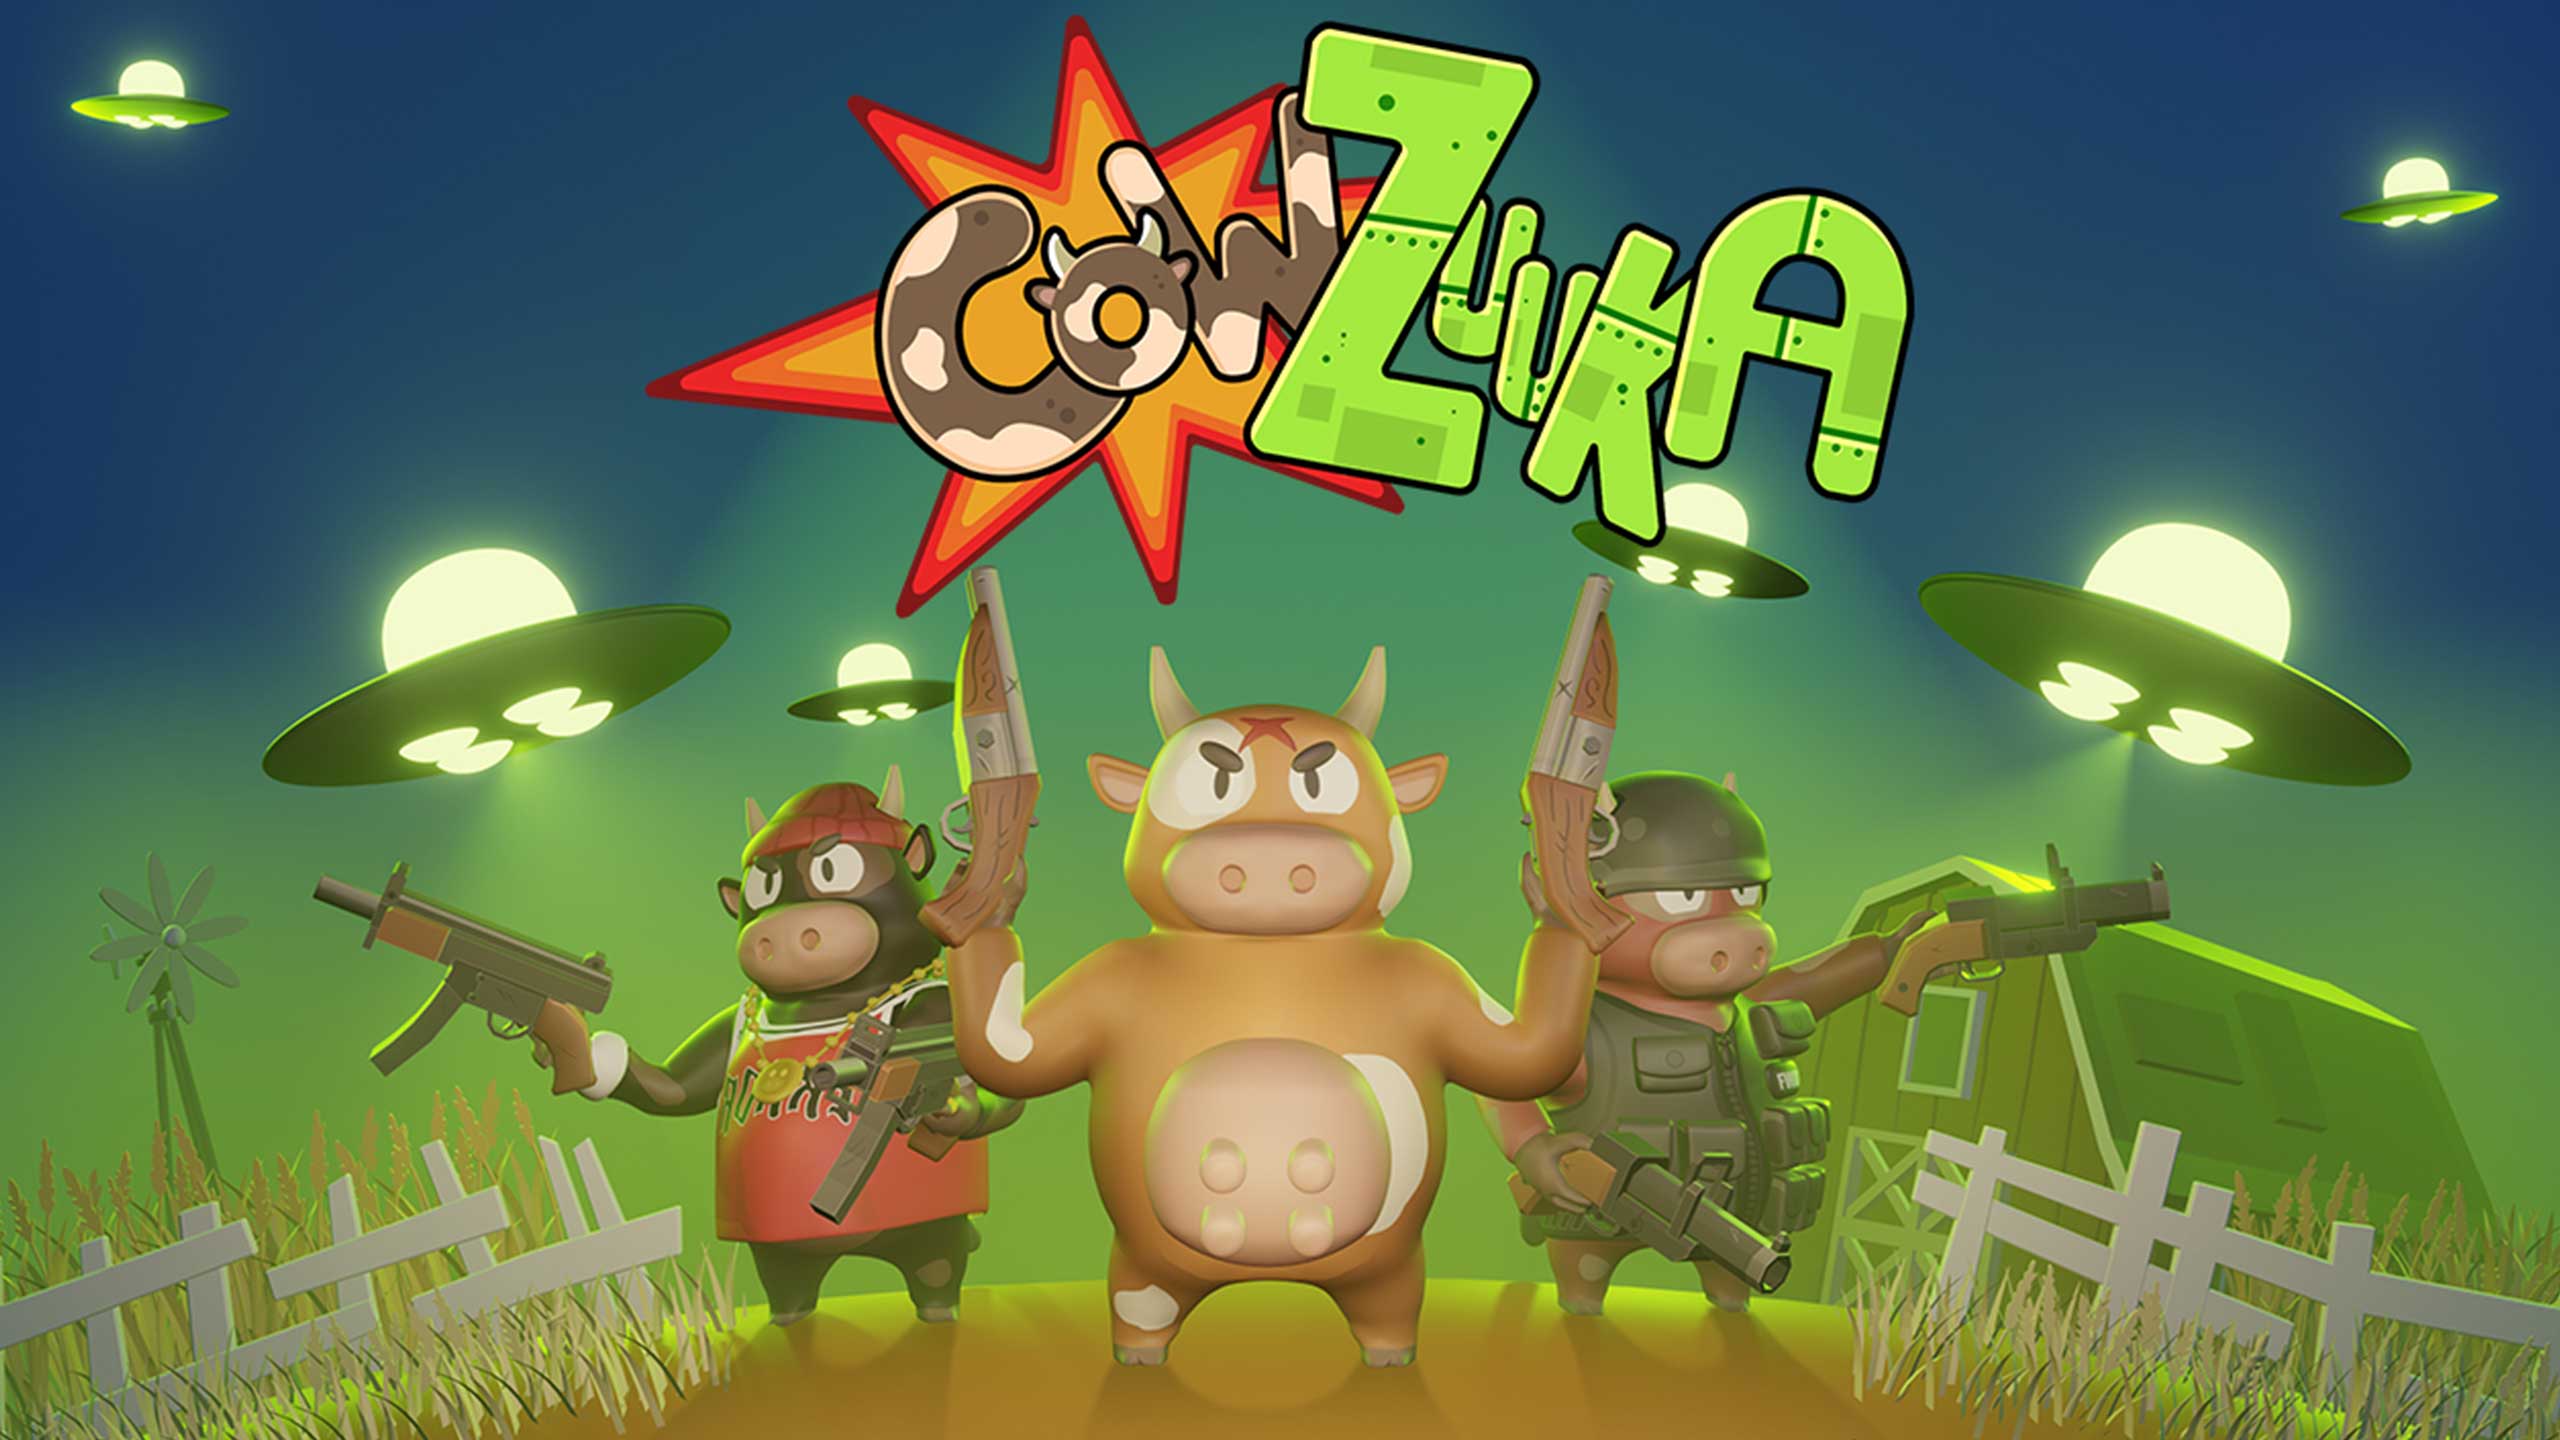 Jyamma Games is back with Cowzuuka a new out-of-this-world shooting game! 